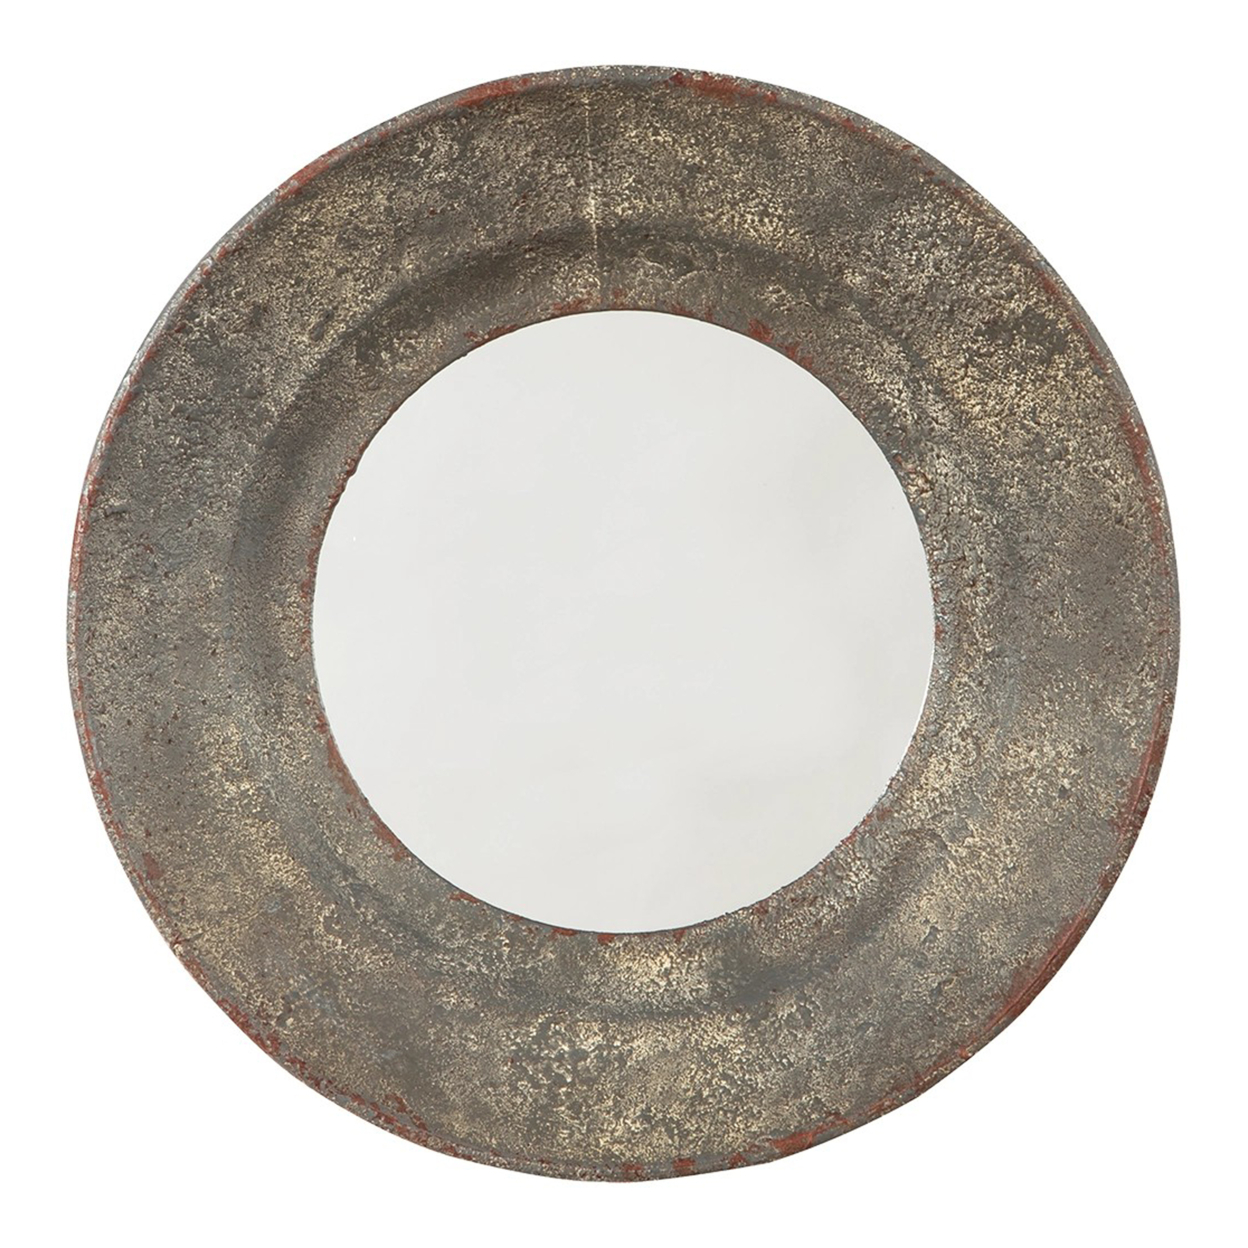 19 Inch Metal Round Tapered Frame Accent Mirror With Keyhole Hanger, Gray- Saltoro Sherpi